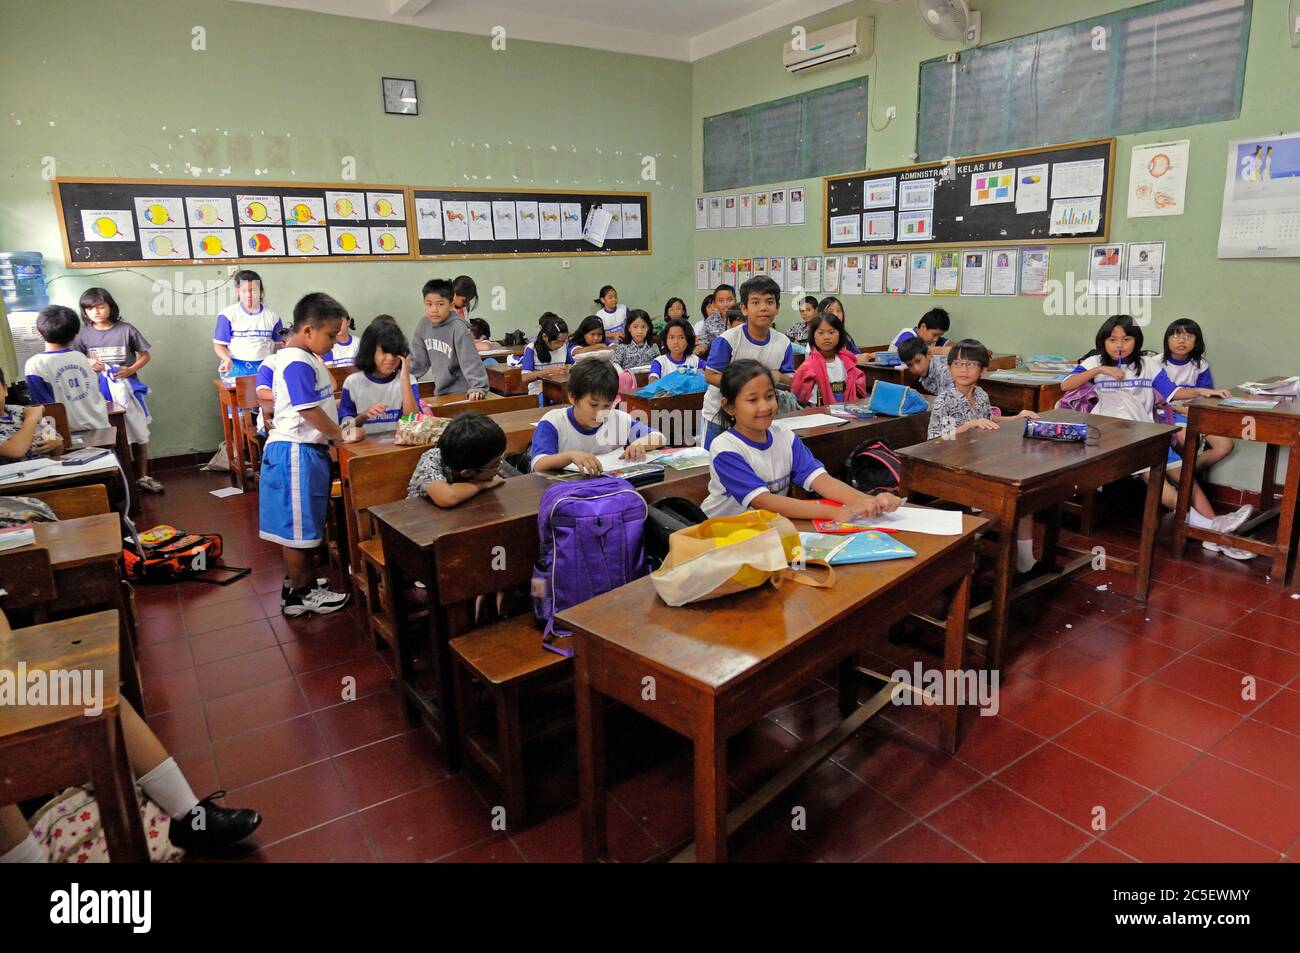 jakarta,  indonesia - november 18, 2009: pupils in their classroom at sdn menteng 01 elementary school which barack obama  attended under the name of Stock Photo